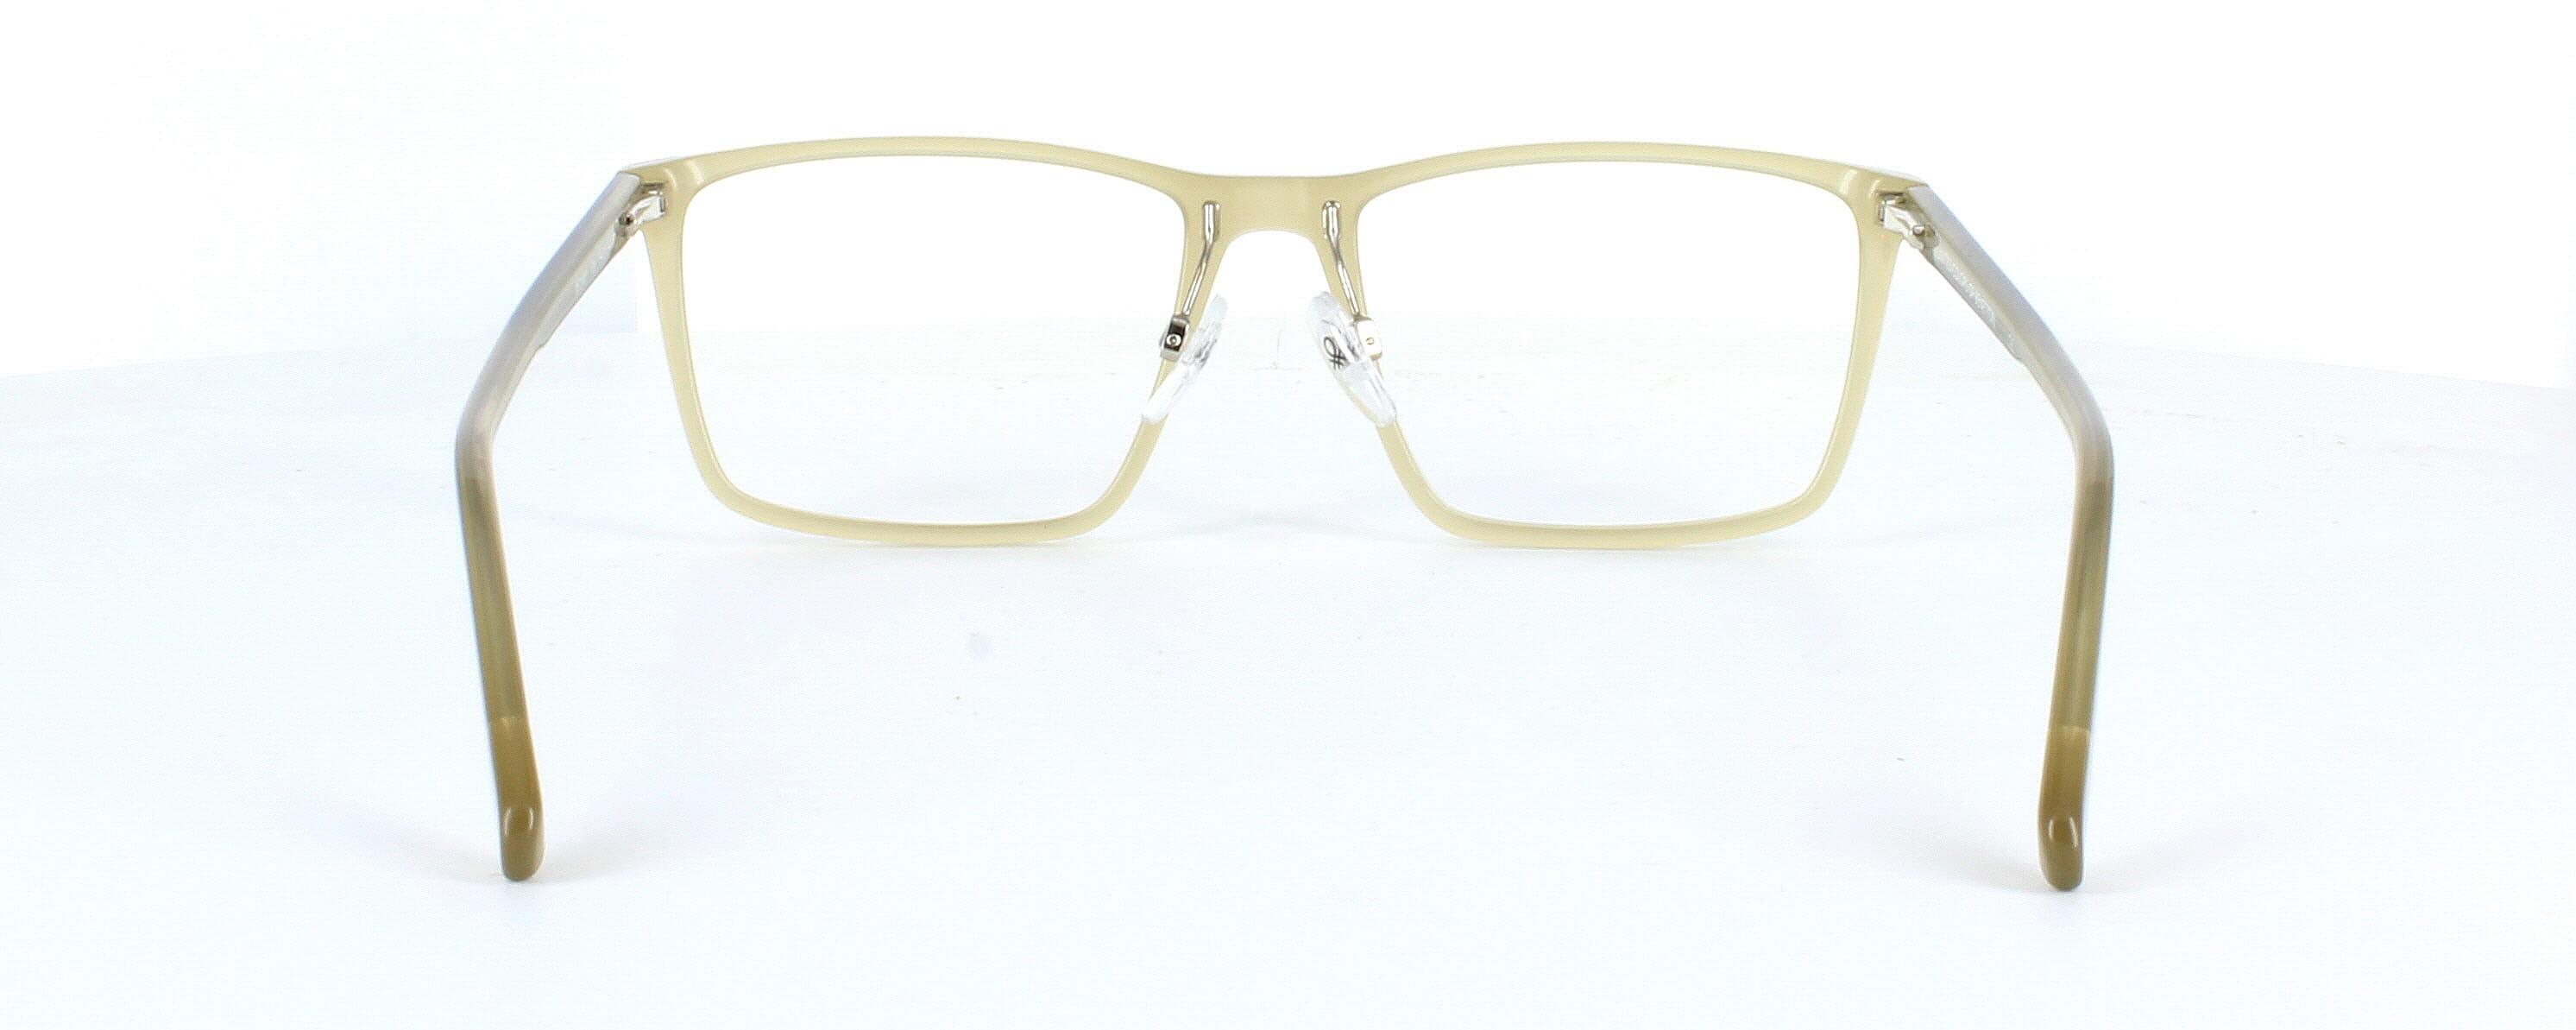 Benetton BE1O001 526 - Gents designer hand made acetate frame with crystal beige face and matching sprung hinge arms - image view 3